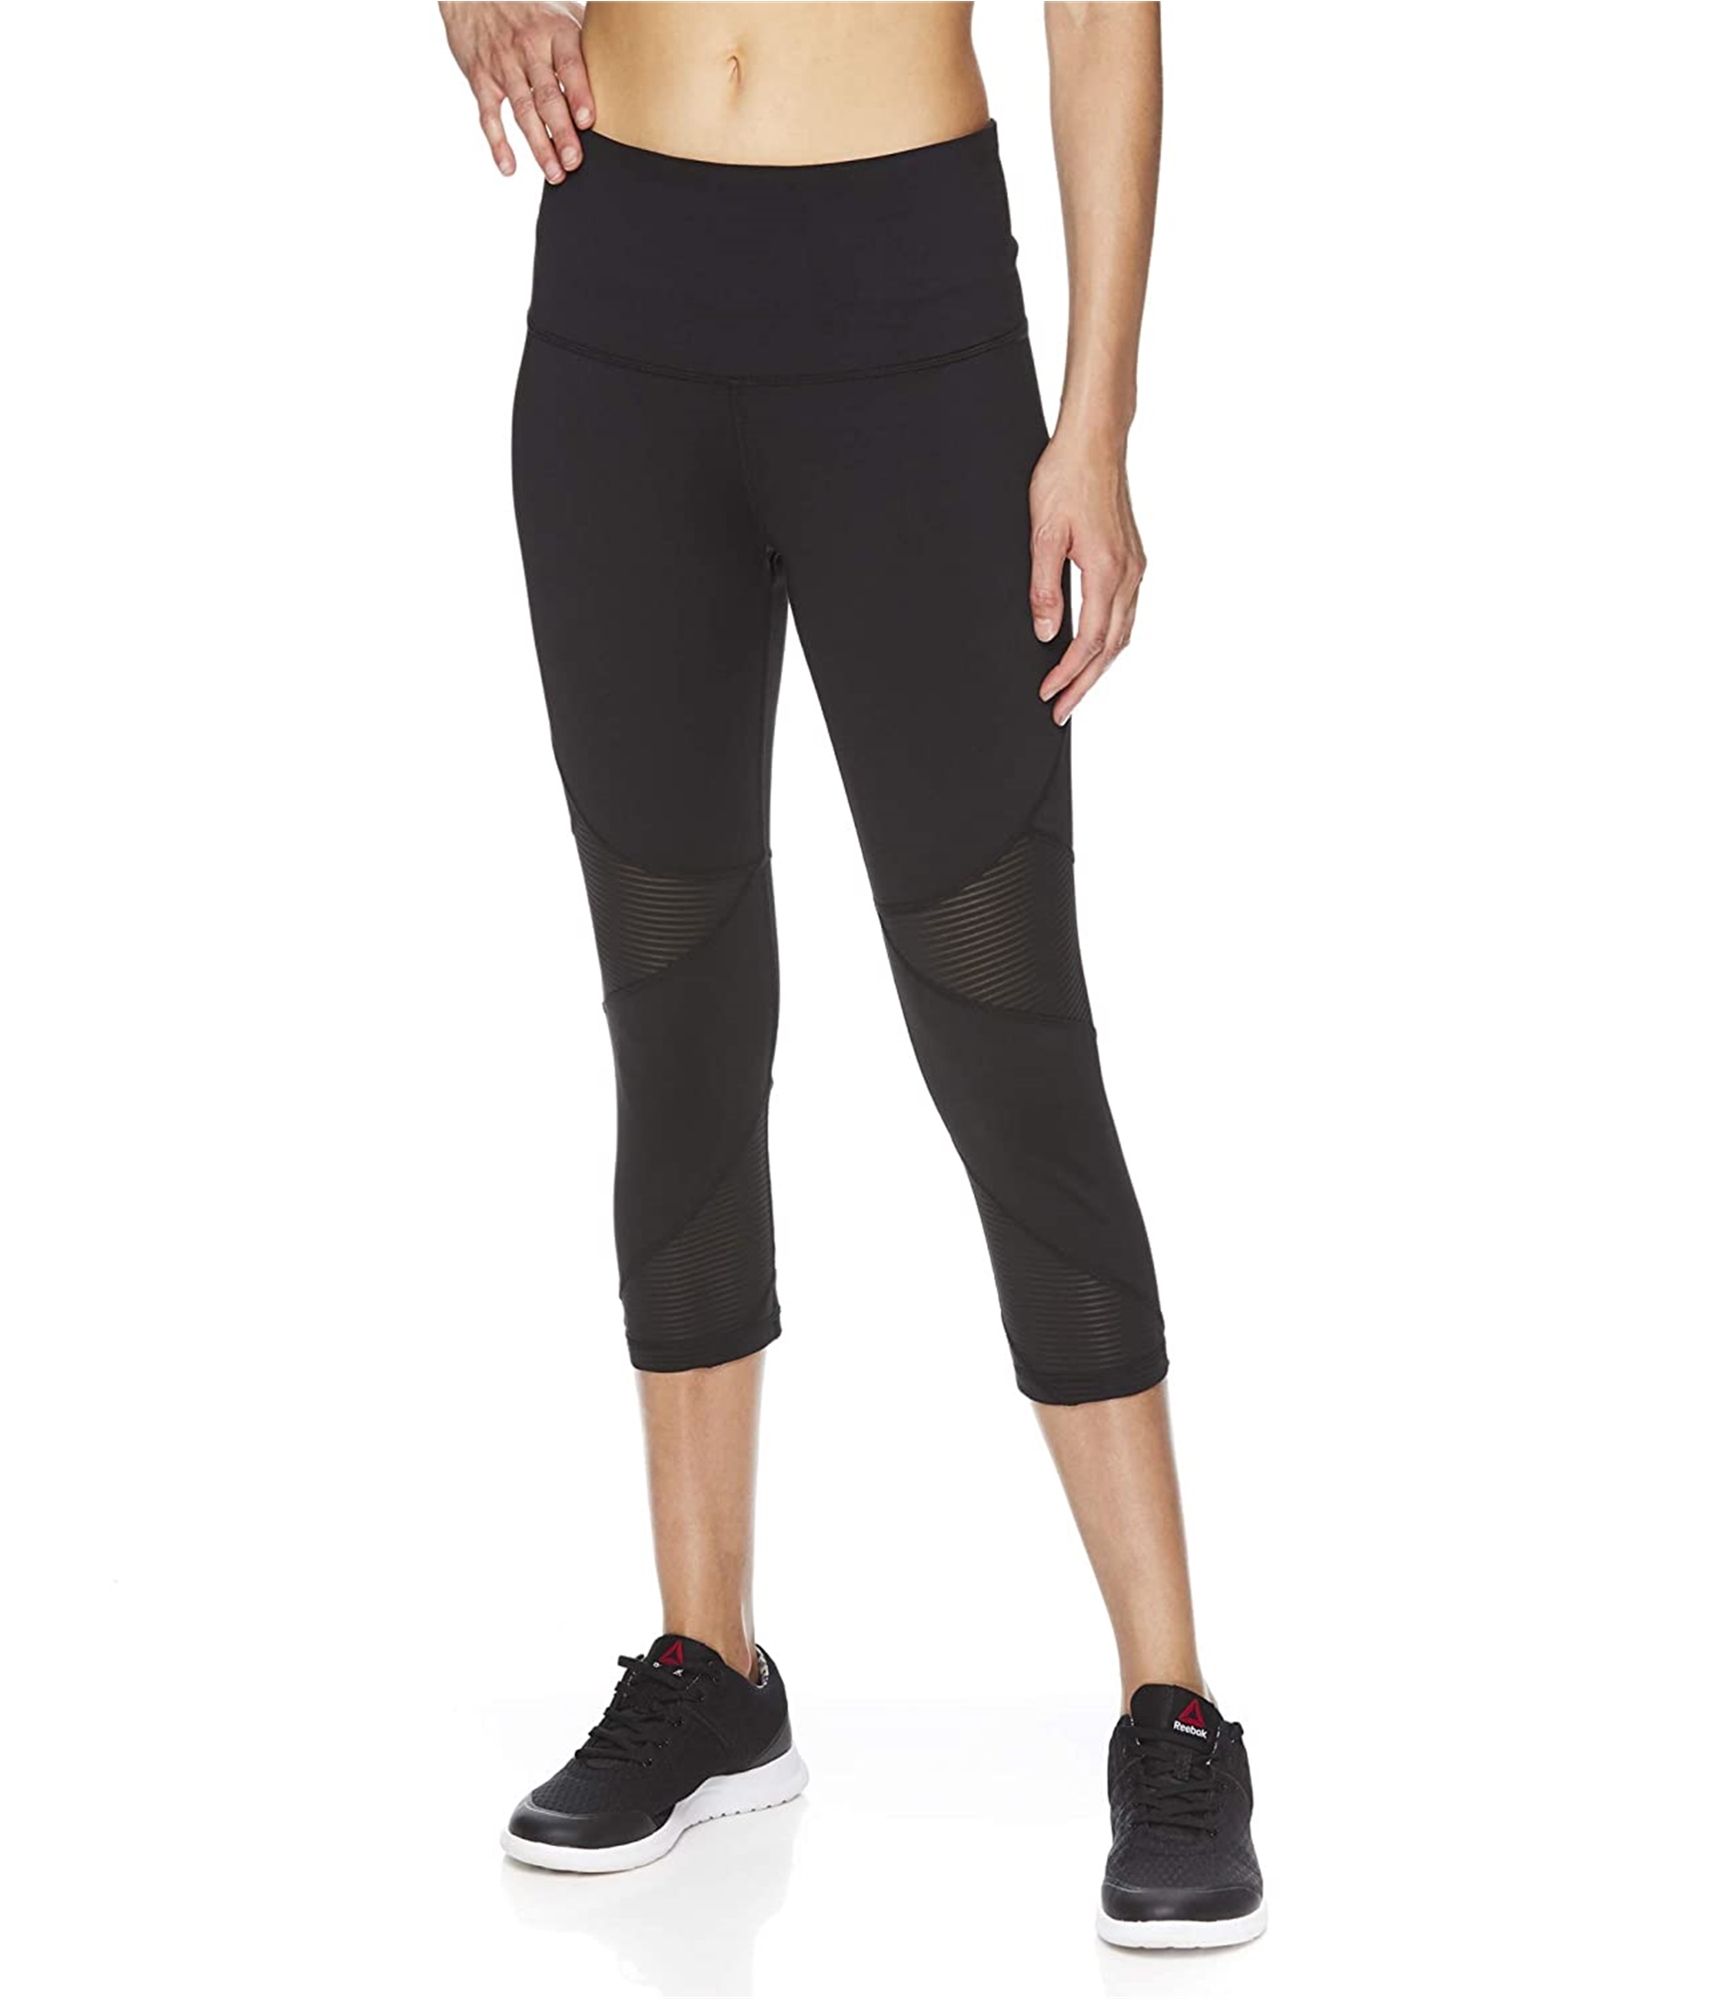 zout boeren Rennen Buy a Womens Reebok Highrise Capri Compression Athletic Pants Online |  TagsWeekly.com, TW2